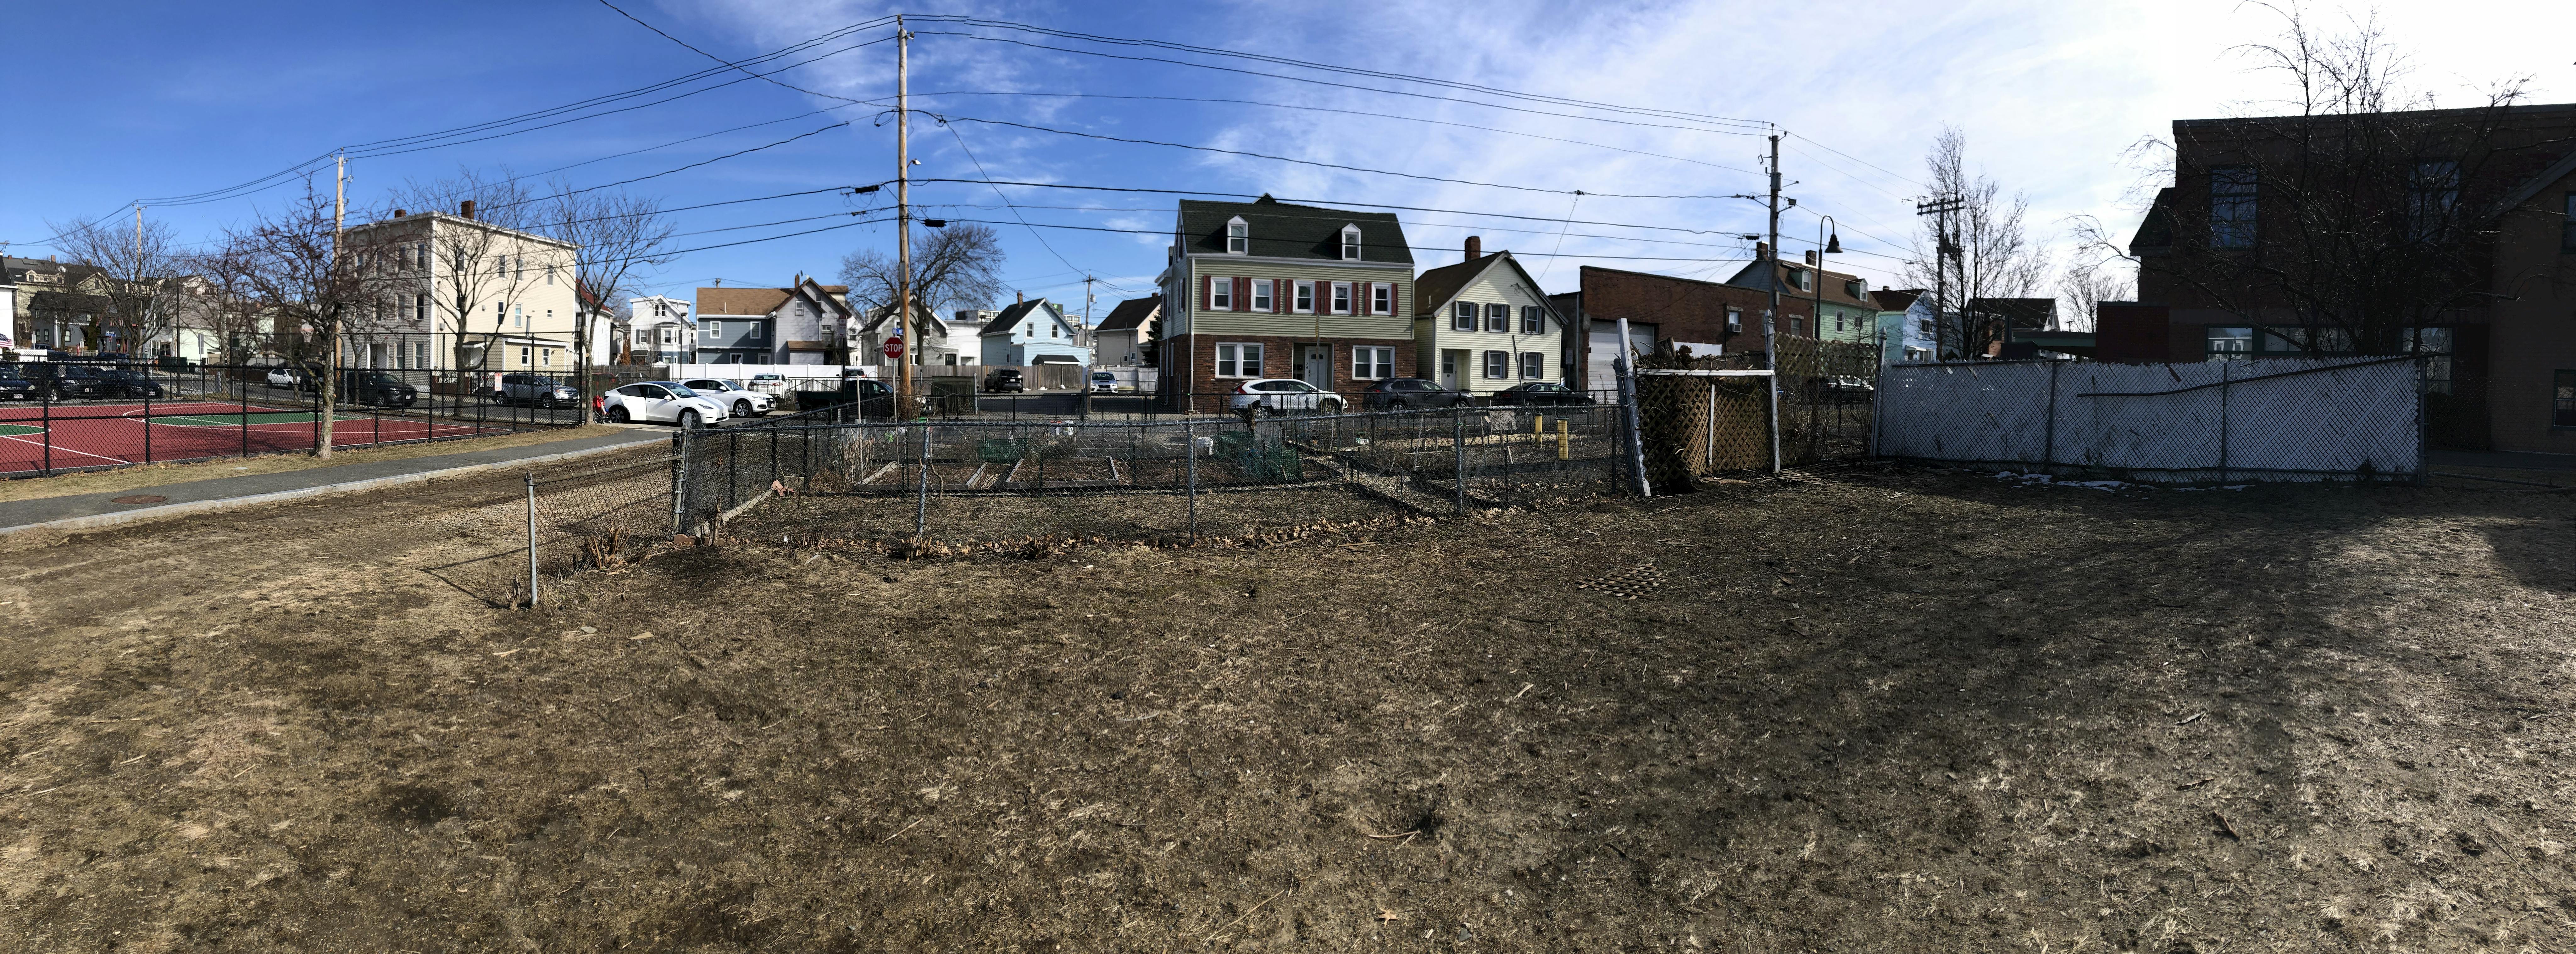 Former 5 Palmer Ave property with existing Glen Park Community Garden plots in background